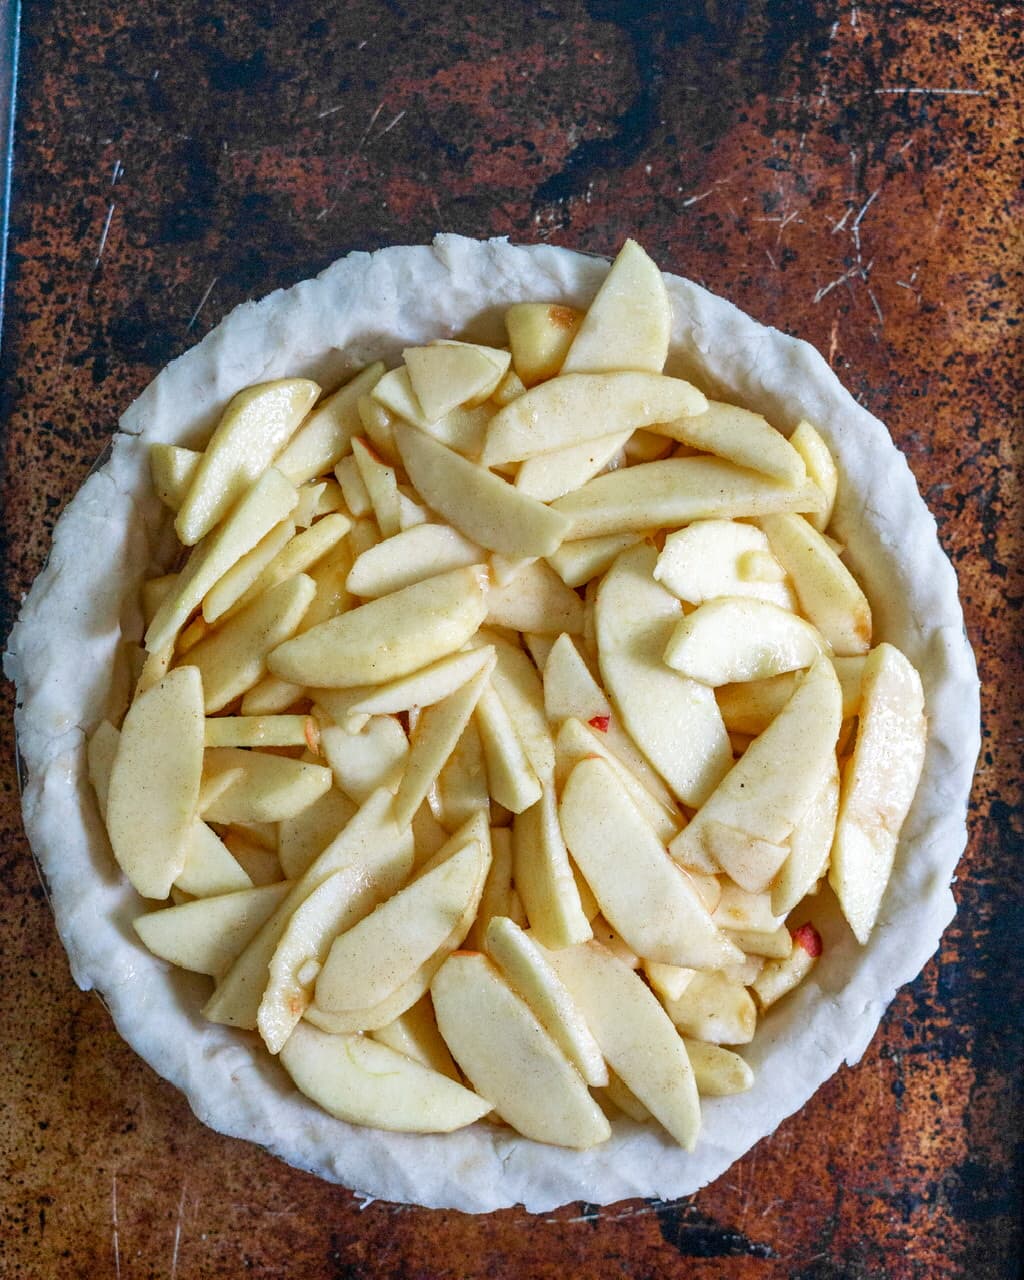 Apples in unbaked crust